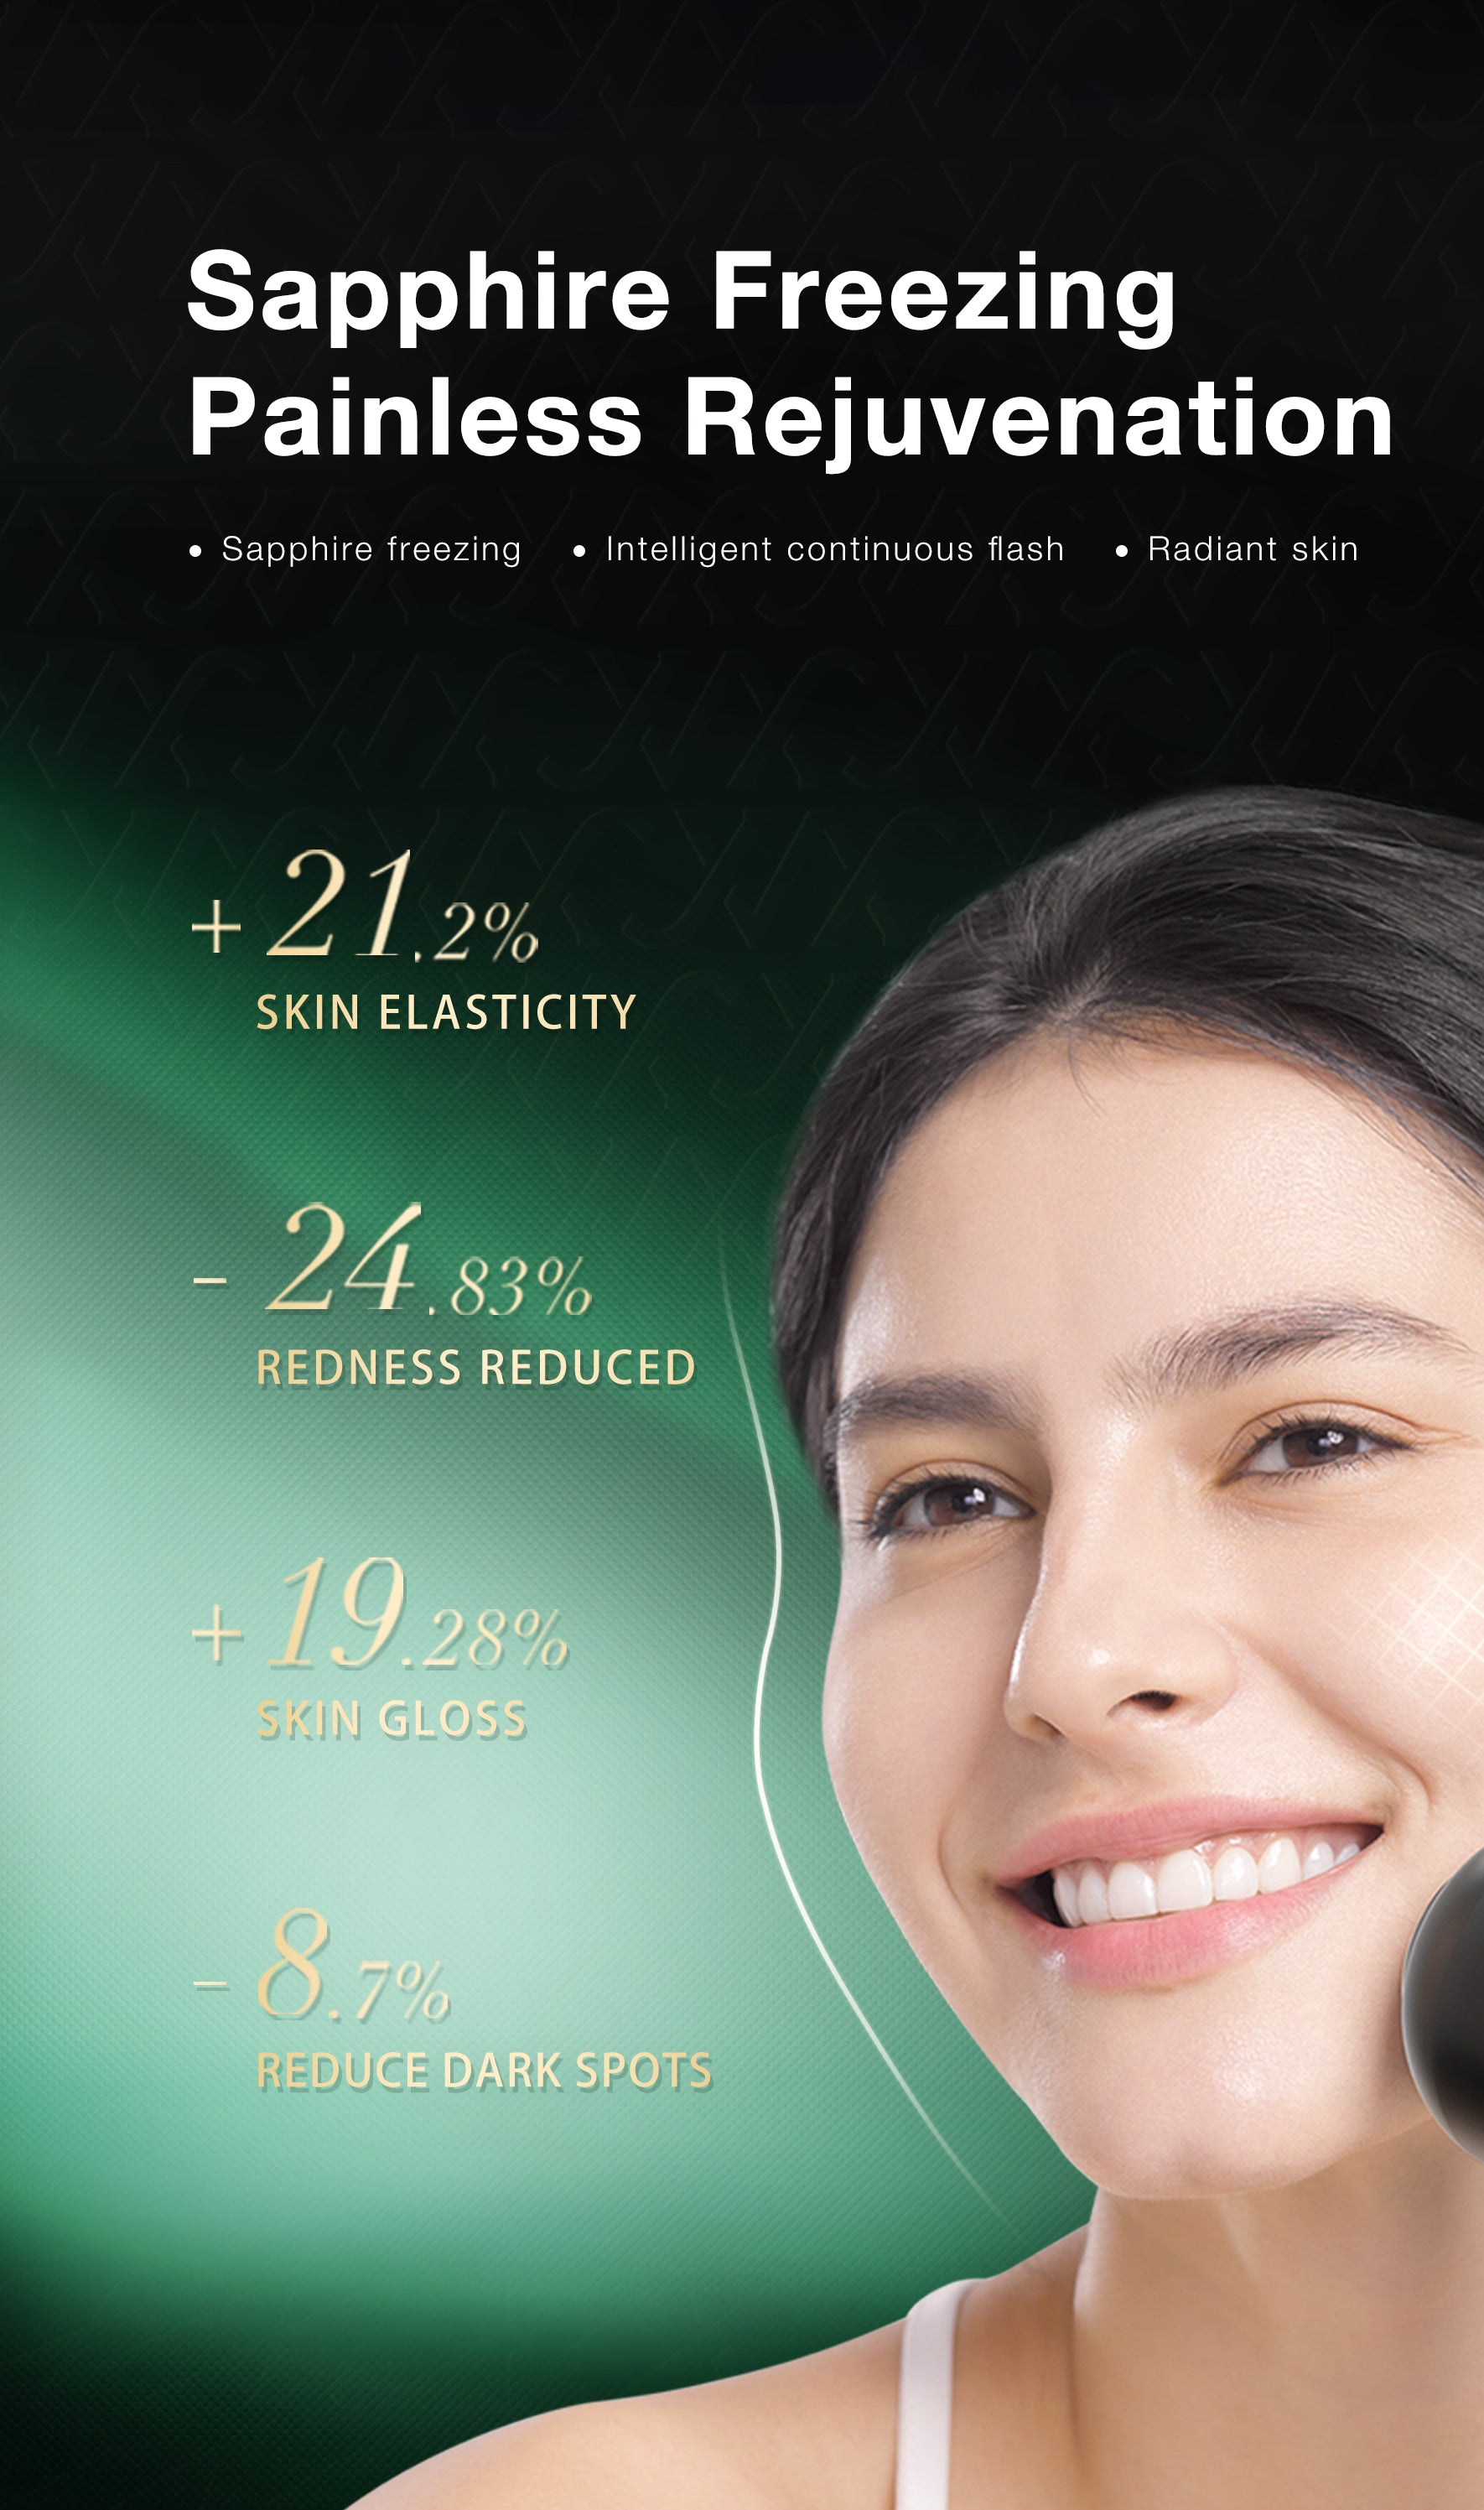 Smiling woman enjoying the benefits of JOVS Blacken PRO DPL with Sapphire Freezing for painless skin rejuvenation, showing increased elasticity, reduced redness, and enhanced skin gloss.